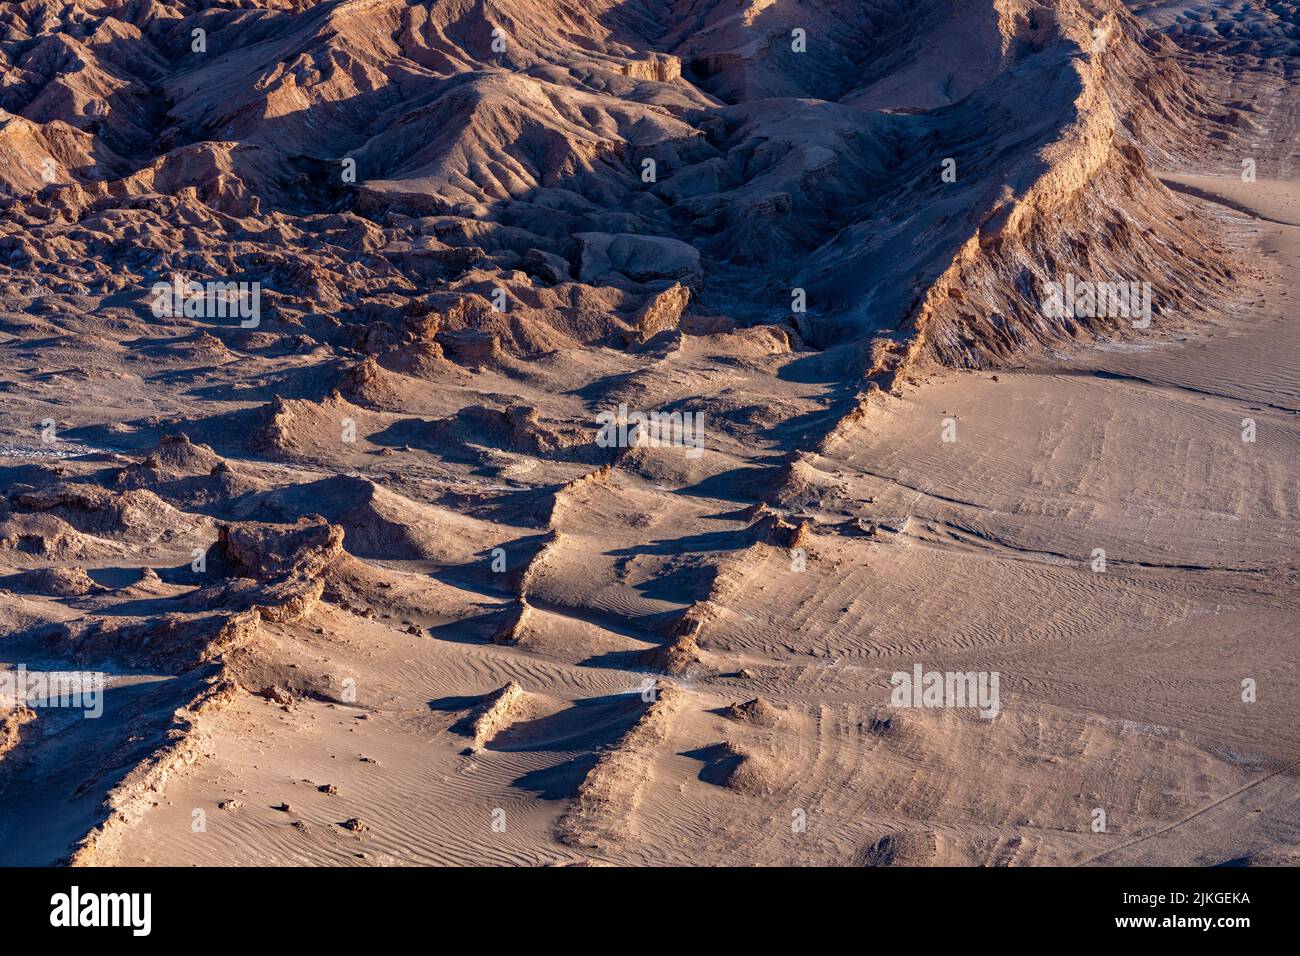 Eroded landscape of the Valley of the Moon or Valle de la Luna from the Coyote Rock Overlook, San Pedro de Atacama, Chile. Stock Photo